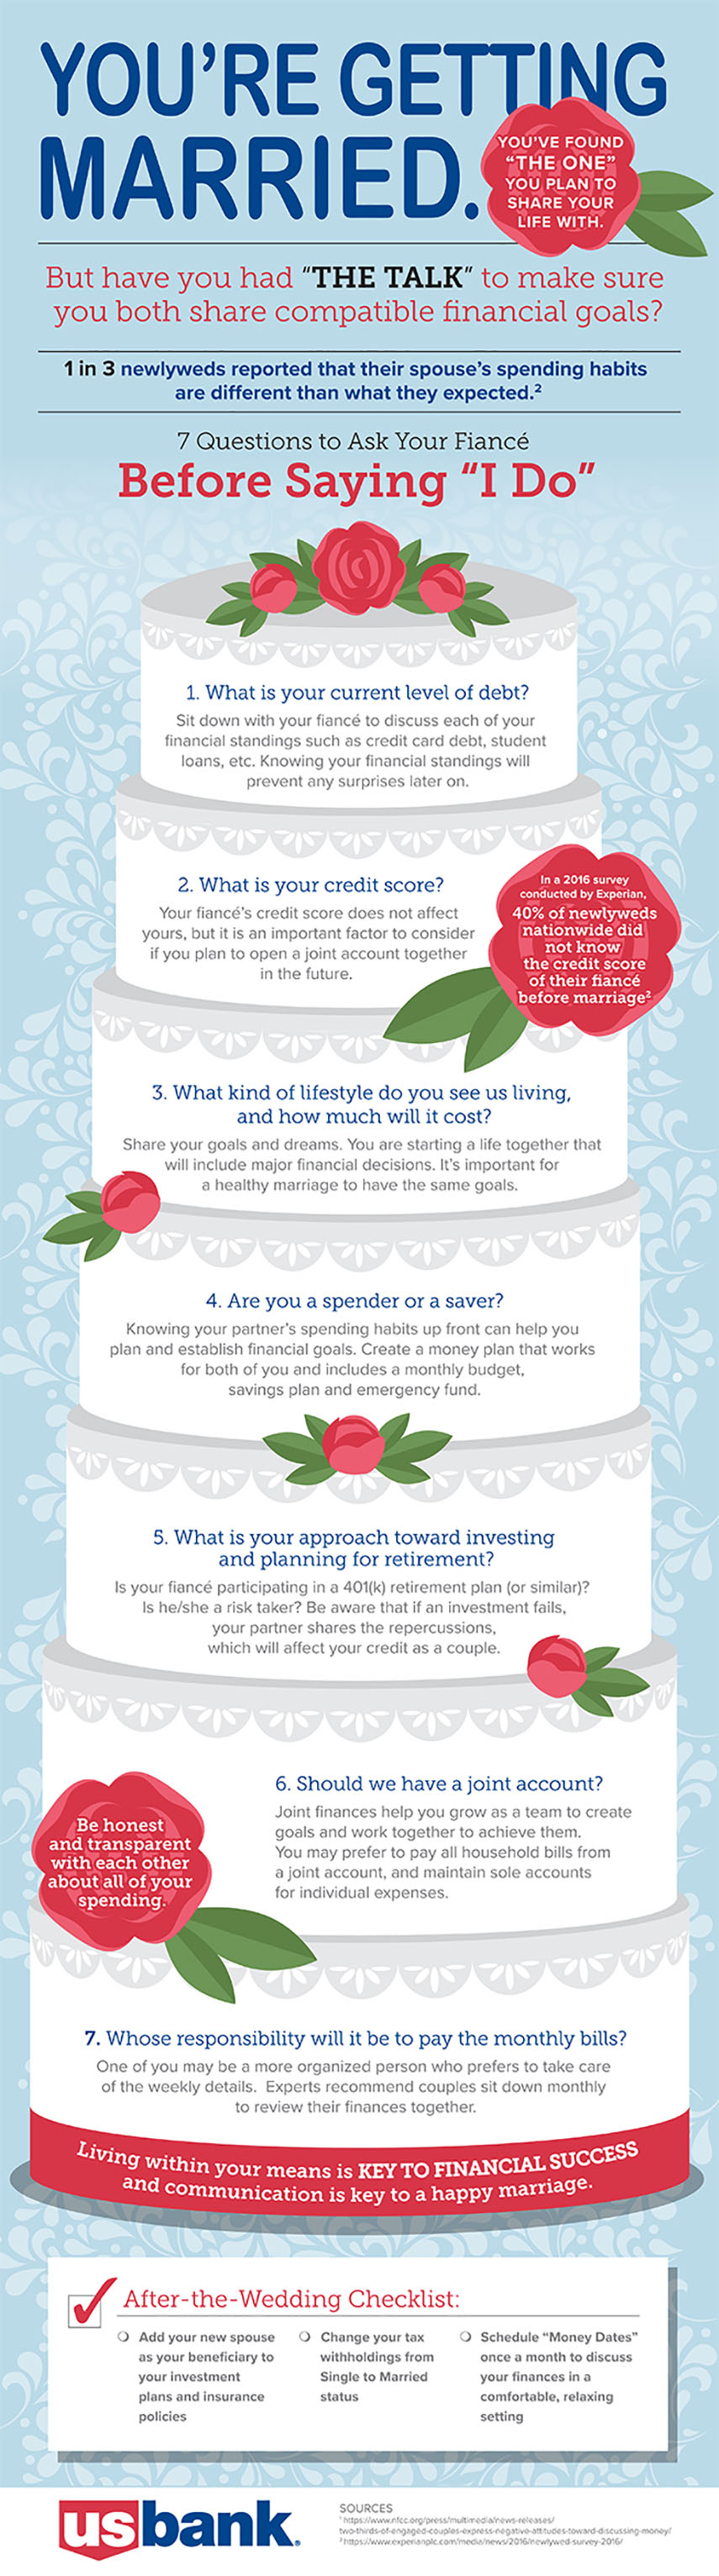 This infographic highlights some key financial points to talk about before getting married.